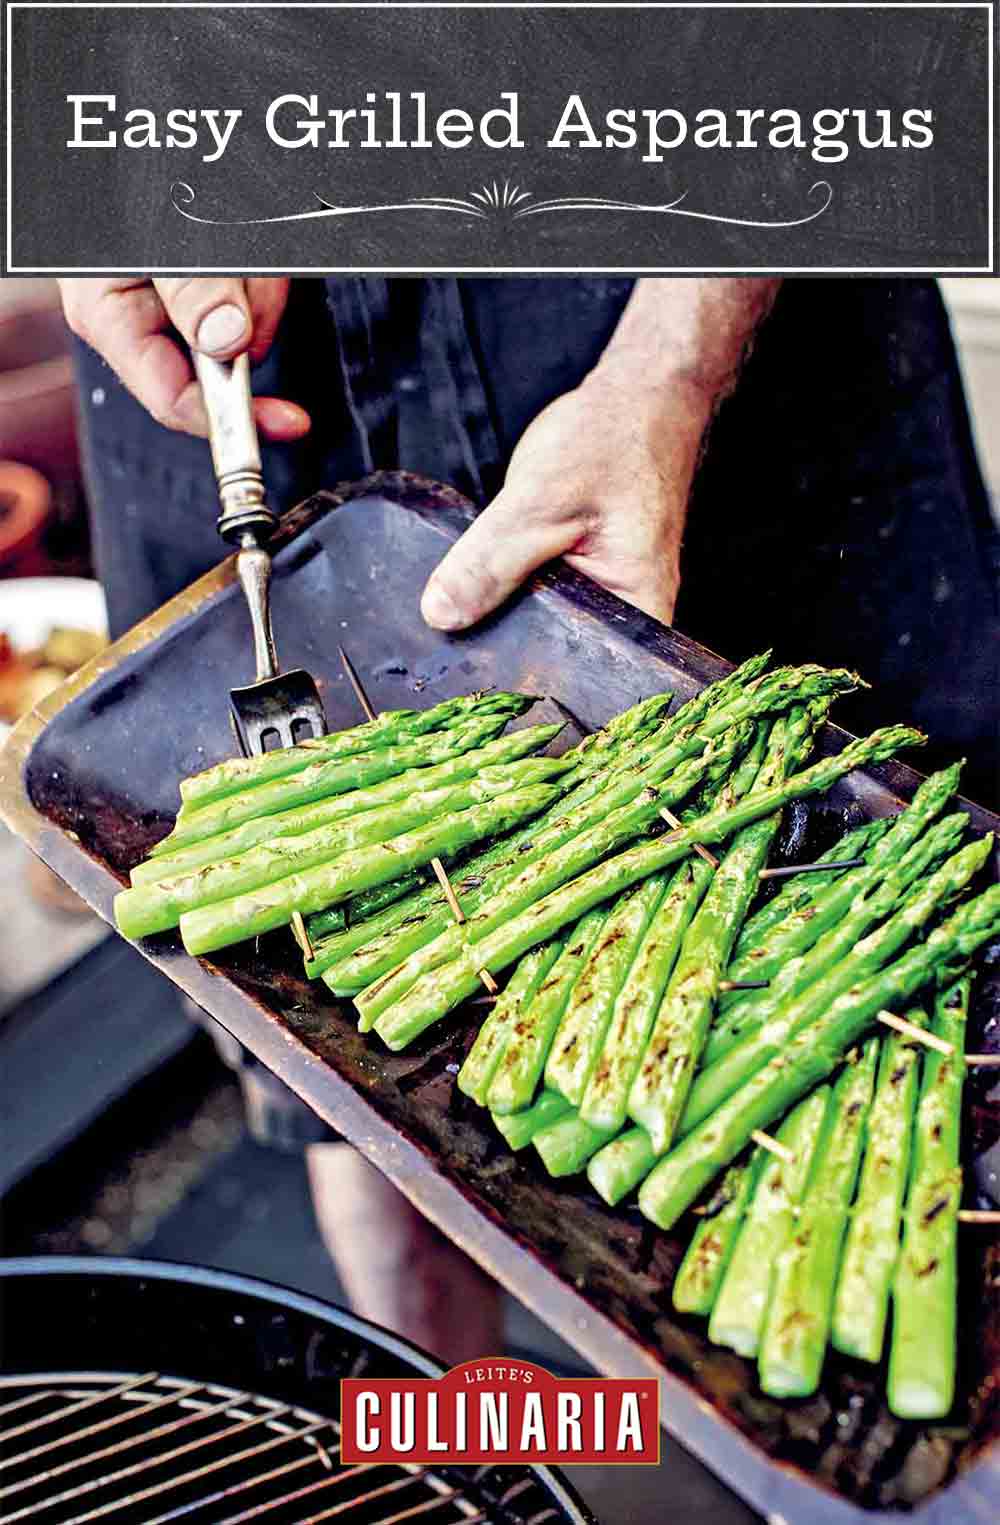 A cook demonstrating how to grill asparagus with several rafts of asparagus spears connected with wooden skewers.